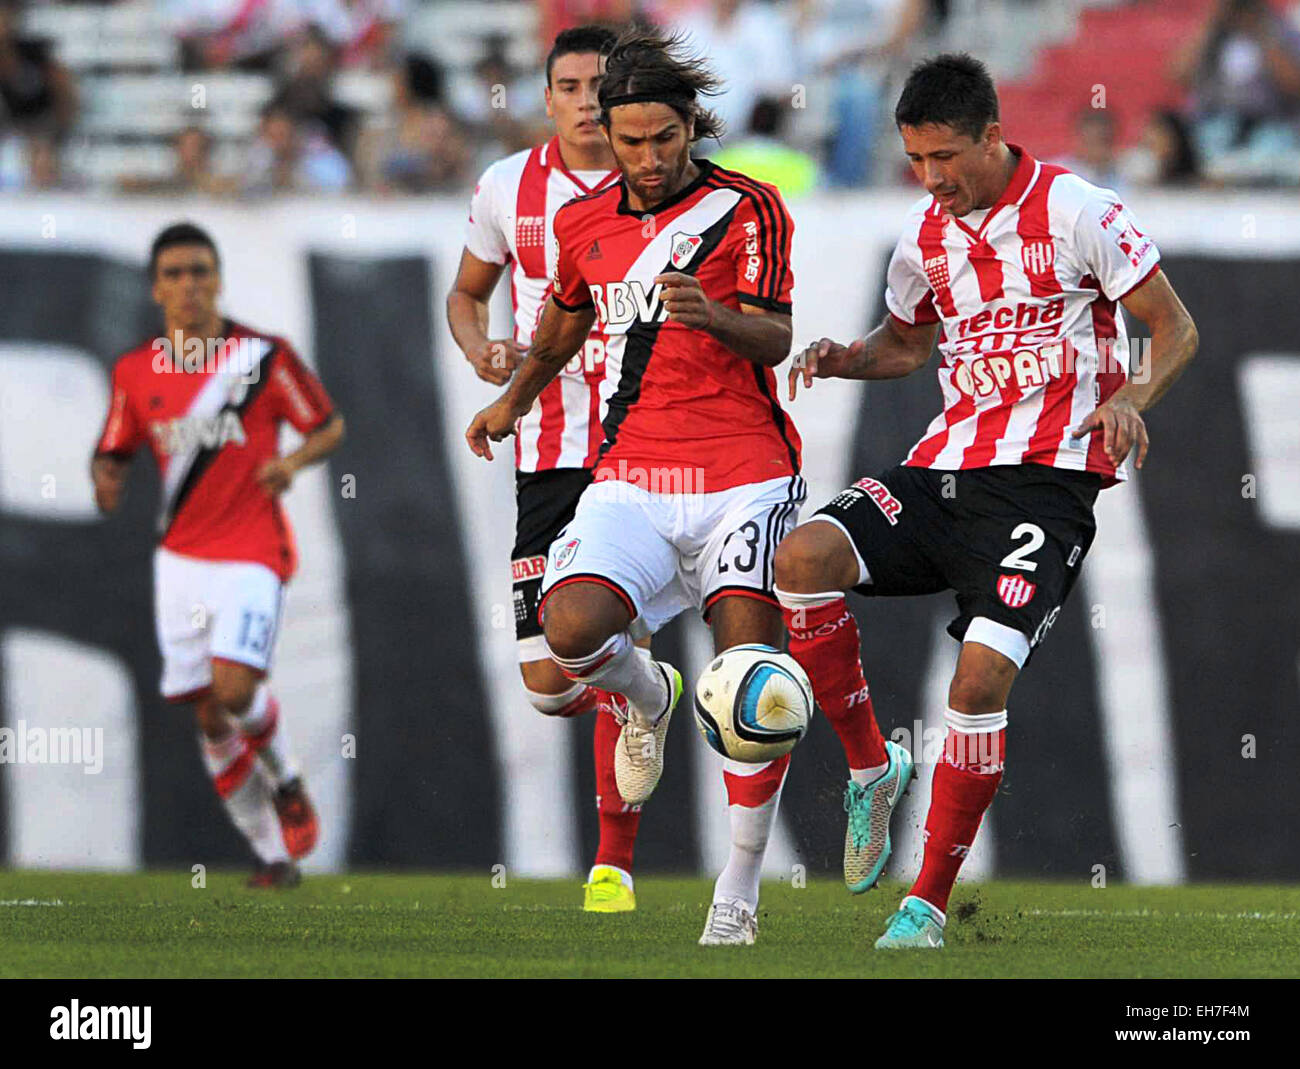 Buenos Aires, Argentina. 8th Mar, 2015. River Plate's Leonardo Ponzio (C) vies for the ball with Rolando Garcia of Union de Santa Fe during the match of the Argentinean soccer, held in the Monumental Stadium in Buenos Aires, Argentina, March 8, 2015. © TELAM/Xinhua/Alamy Live News Stock Photo